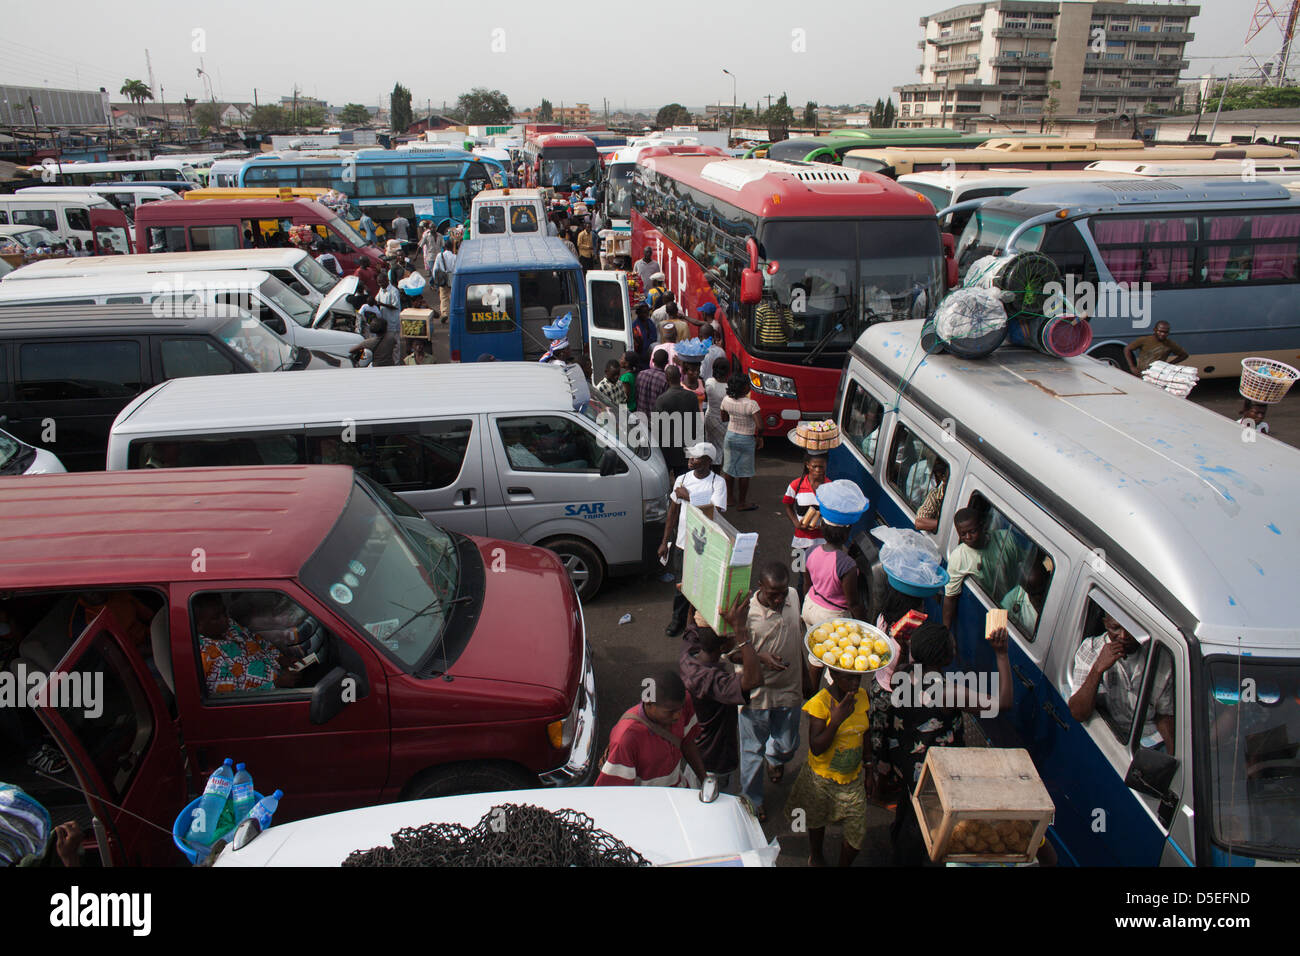 The New Plan bus station in Accra, Ghana. Stock Photo